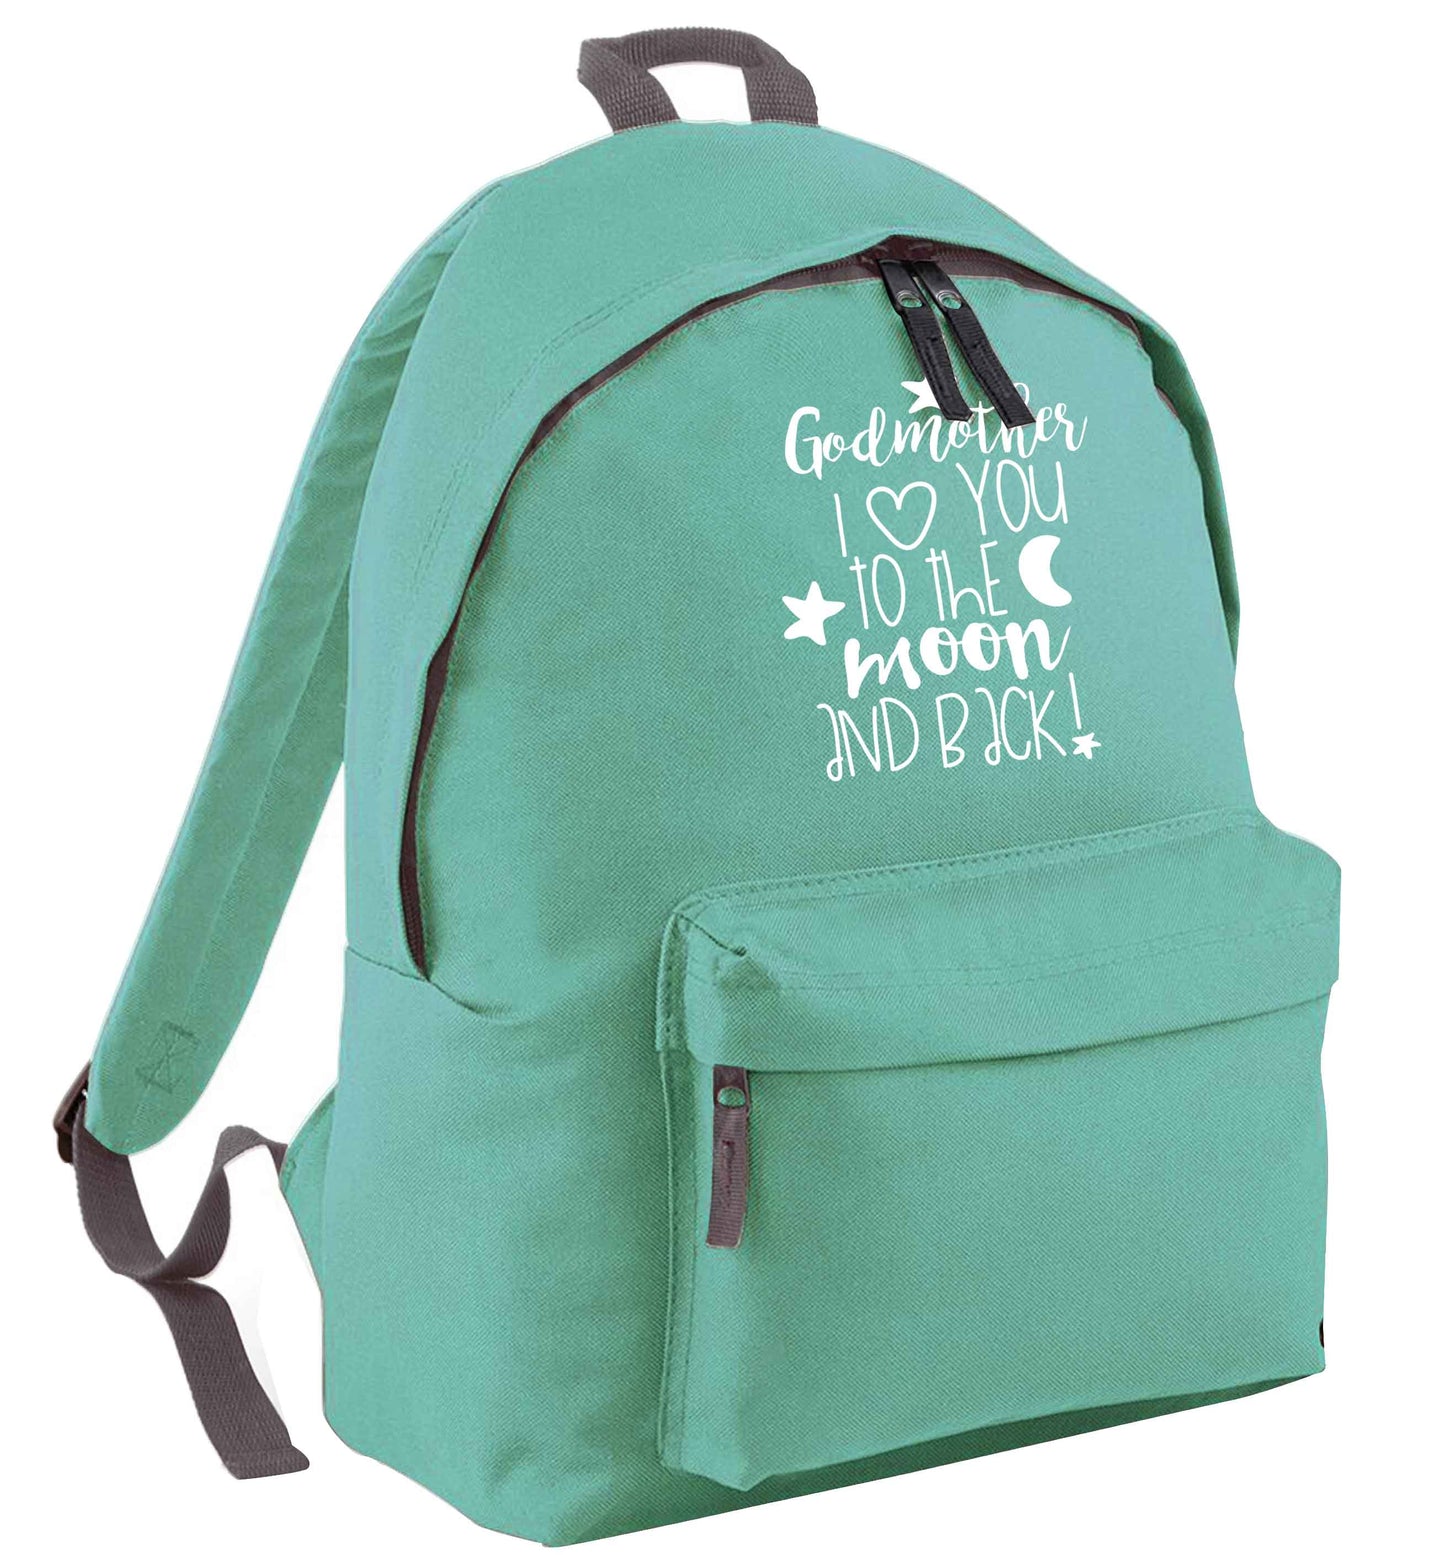 Godmother I love you to the moon and back mint adults backpack